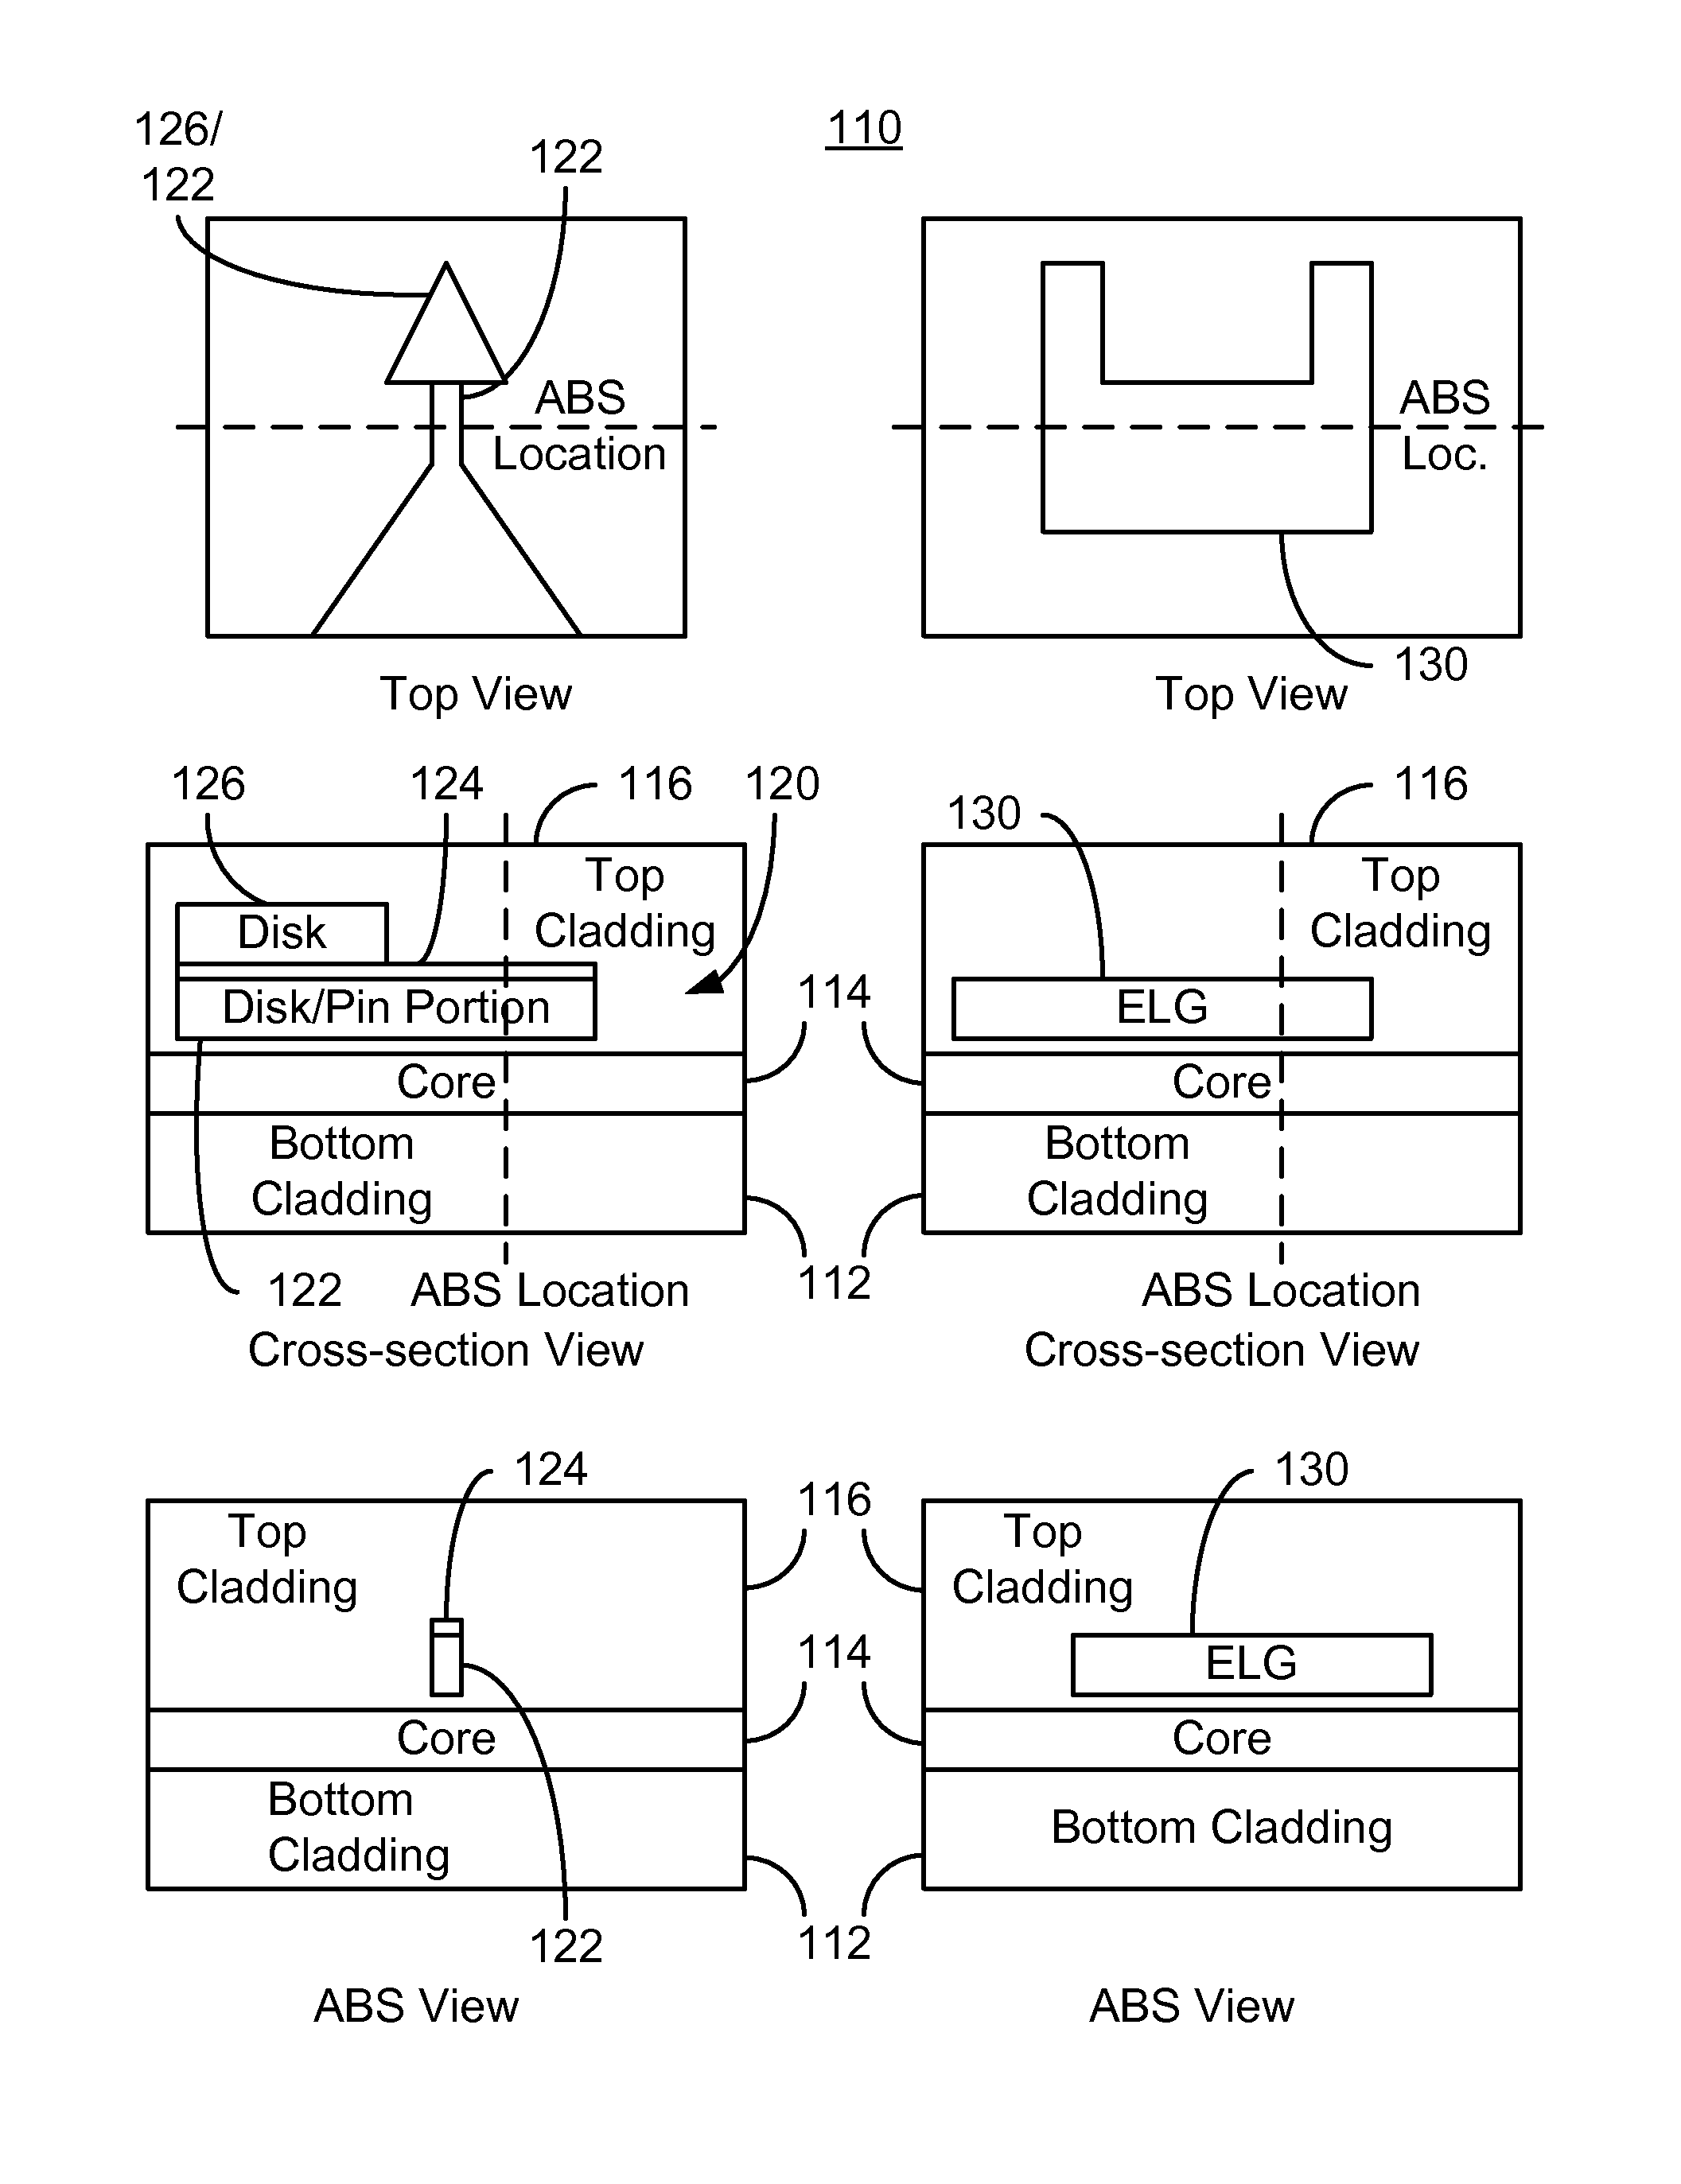 Method and system for providing an electronic lapping guide corresponding to a near-field transducer of an energy assisted magnetic recording transducer